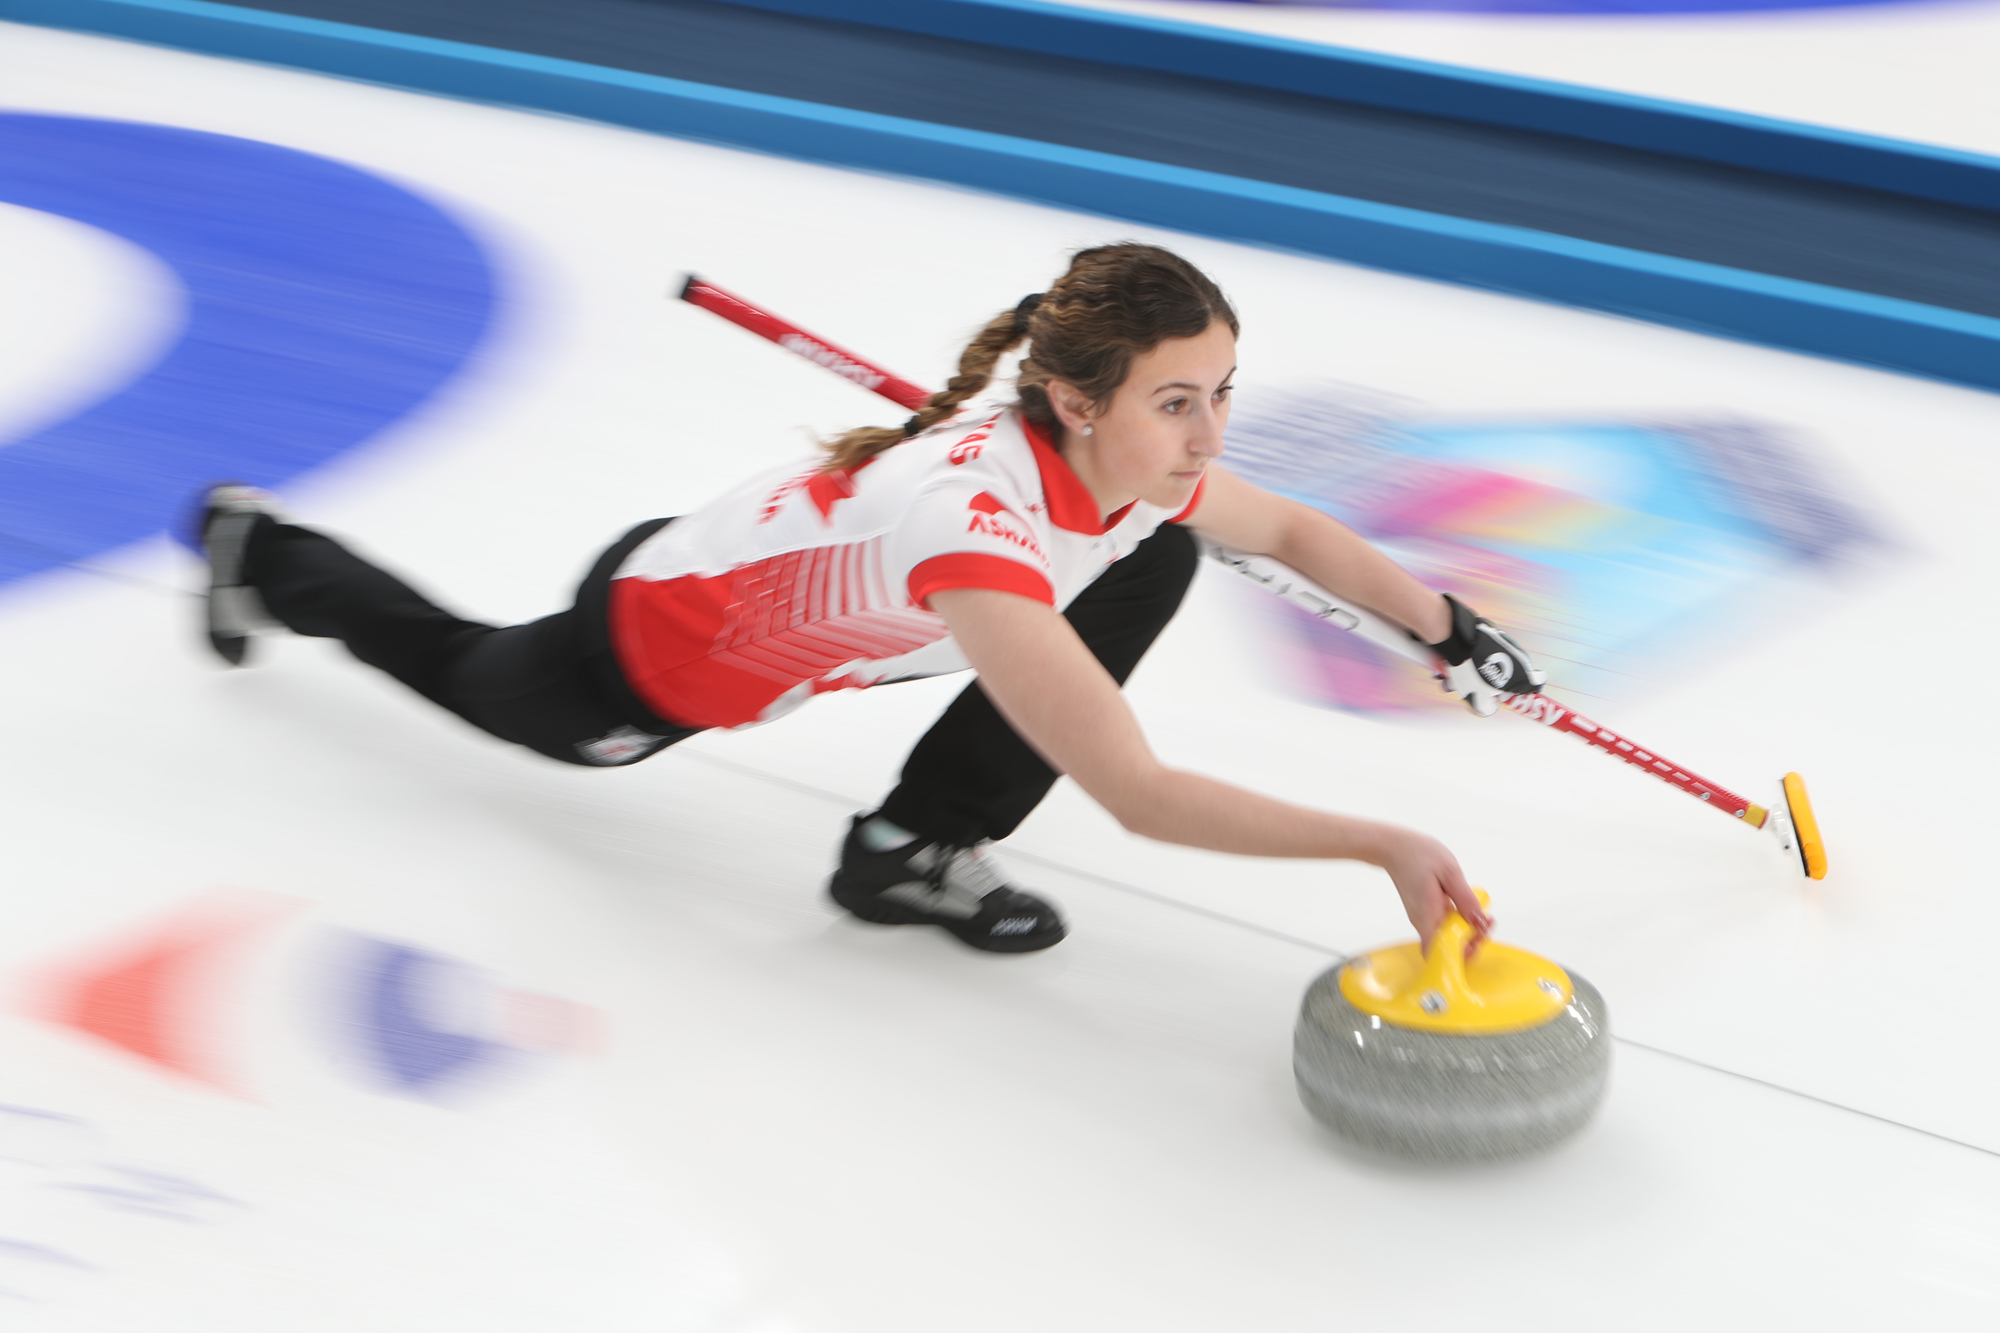 Defending champions Russia suffer first defeat at World Junior Curling Championships